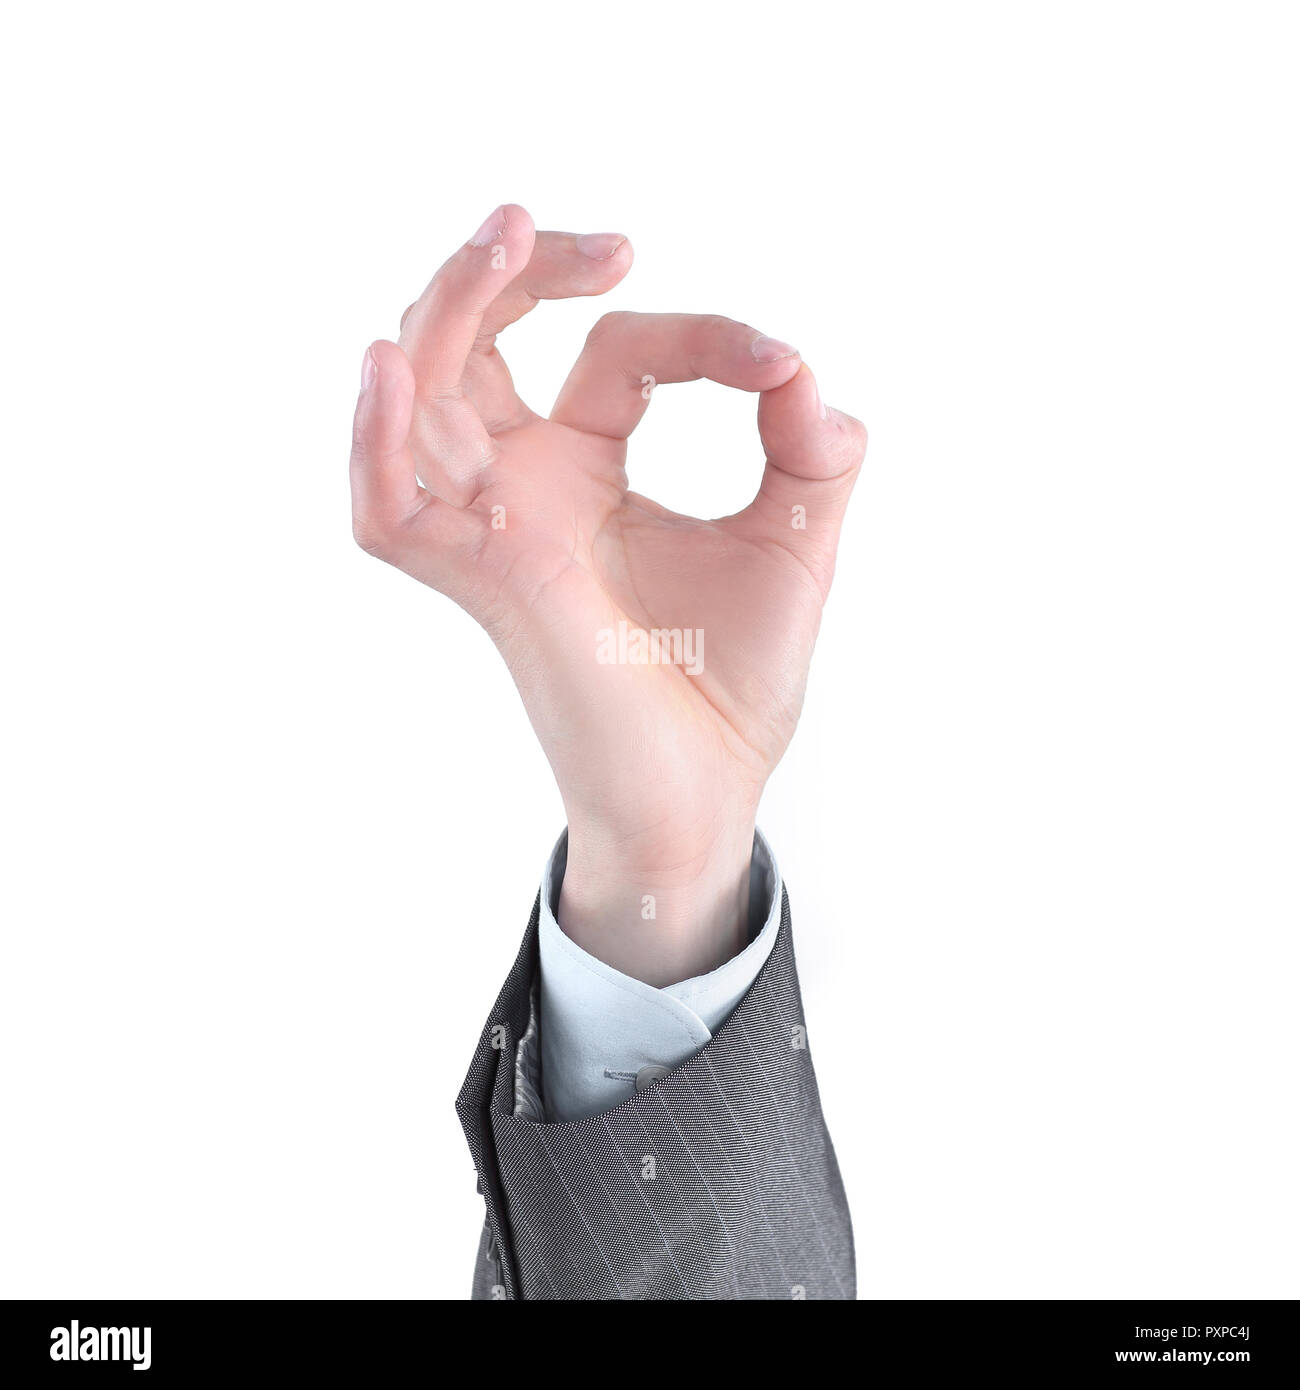 young businessman showing OK sign. isolated on a white background. Stock Photo